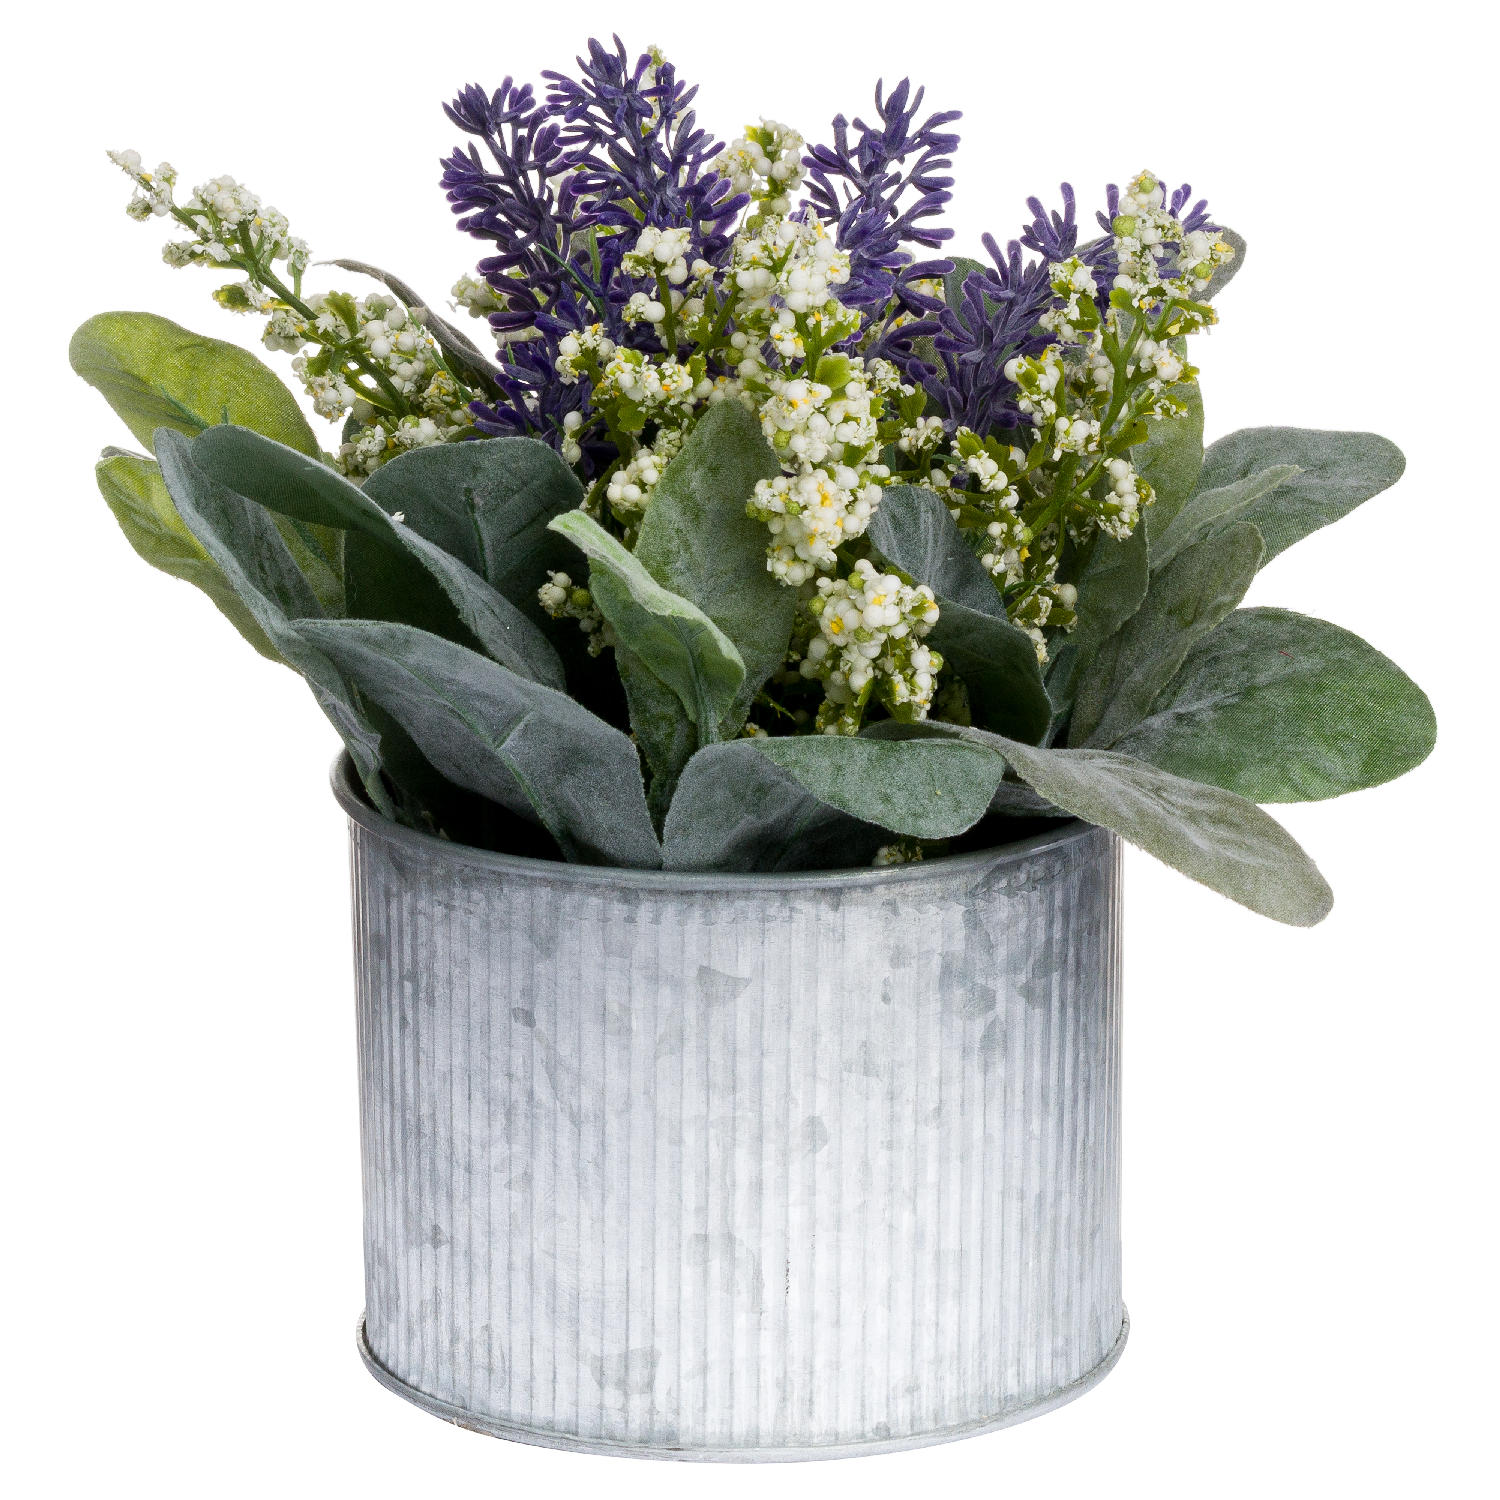 Lavender And Lily In Tin Pot - Image 1